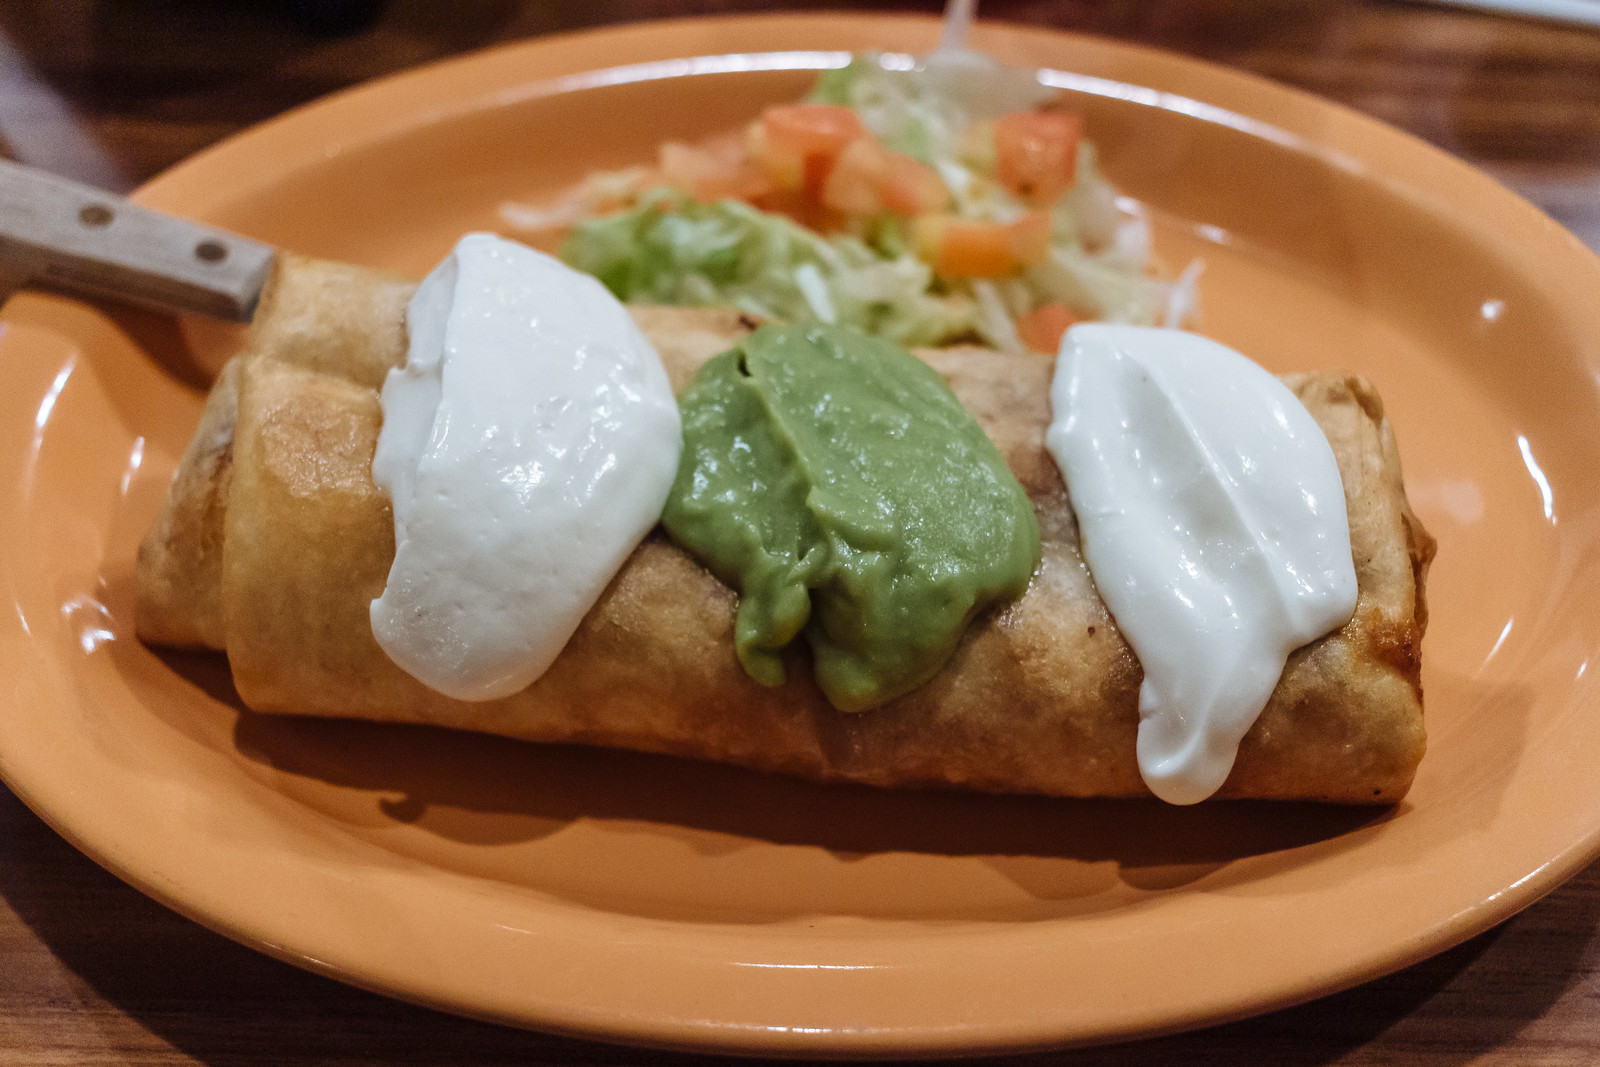 A chimichanga or deep-fried burrito topped with dollops of sour cream and guacamole